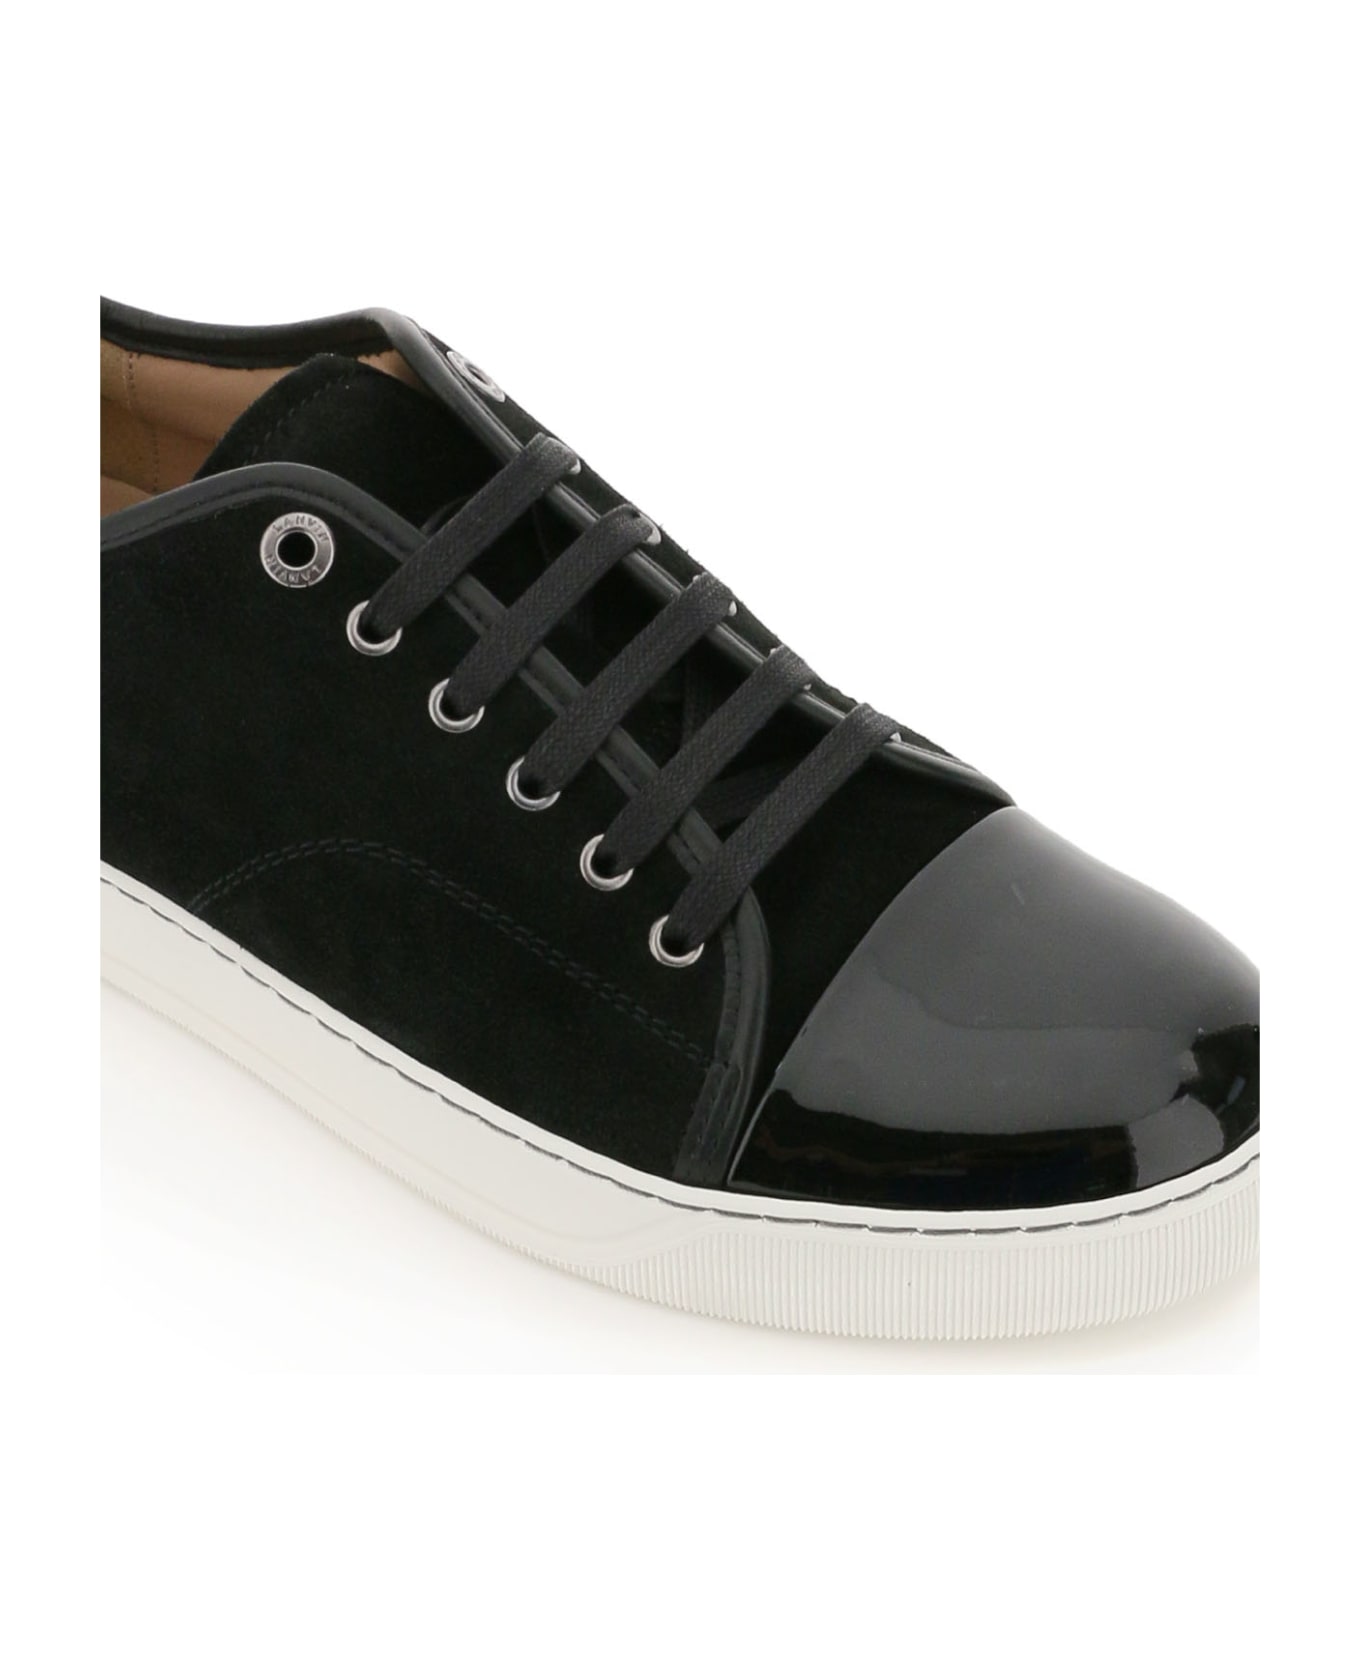 Lanvin Dbb1 Sneakers In Black Suede And Leather - BLACK (Black) スニーカー